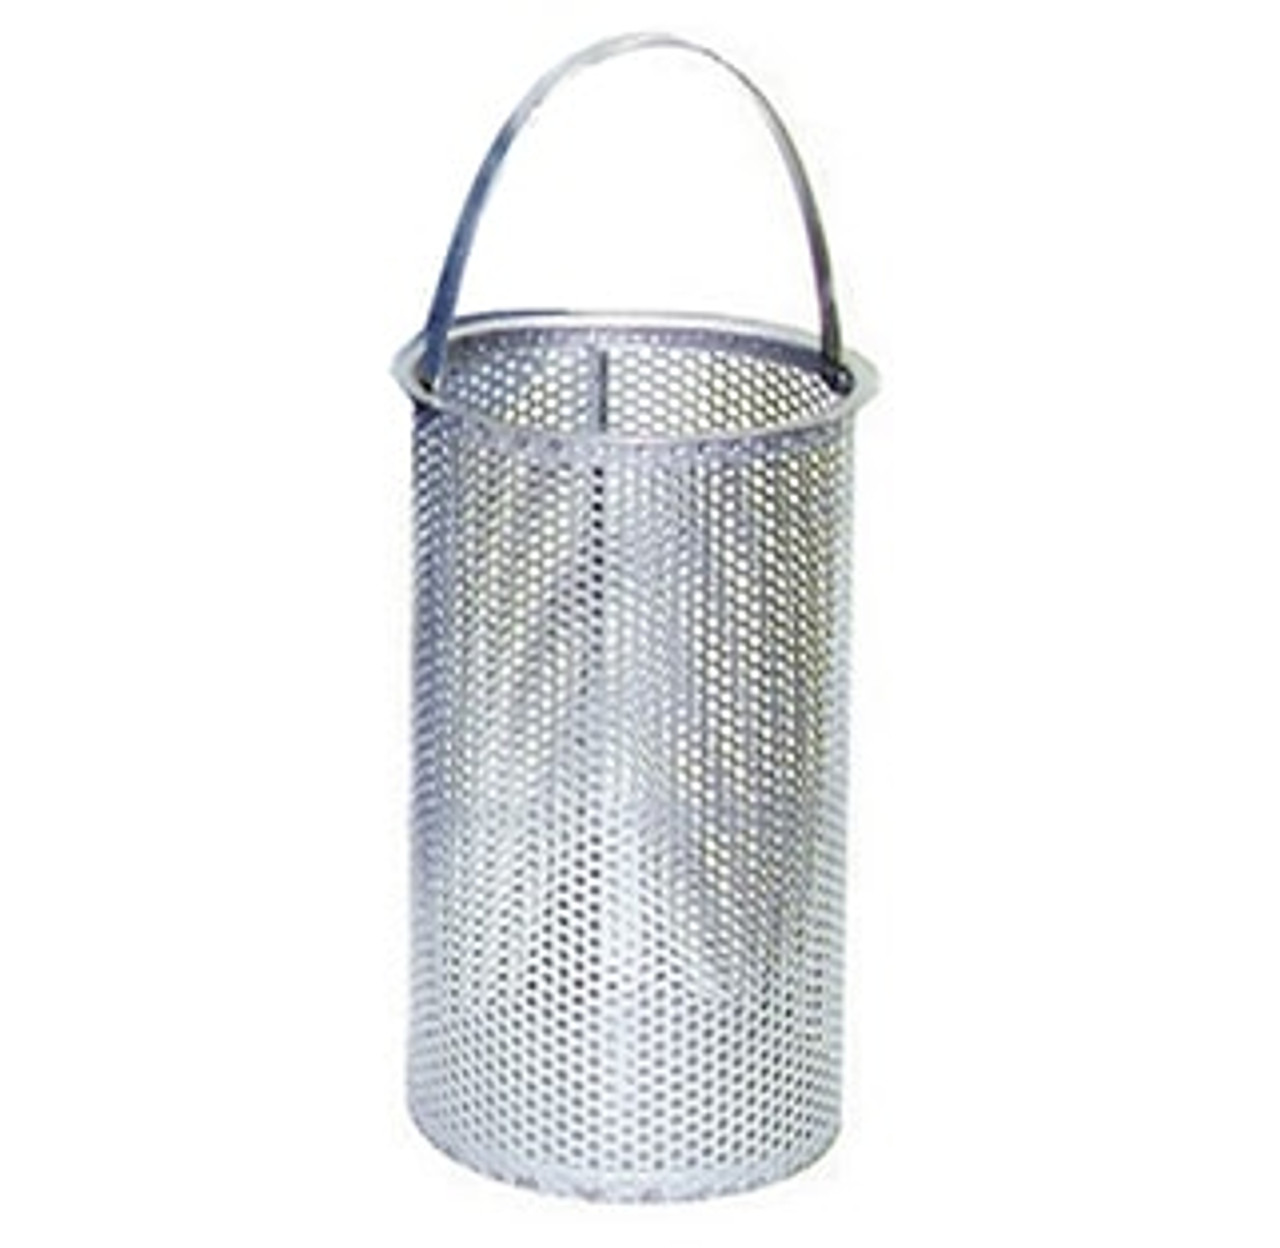 80 Mesh and 5/32" Perforation Replacement Basket for 6" Eaton Model 30R Strainer